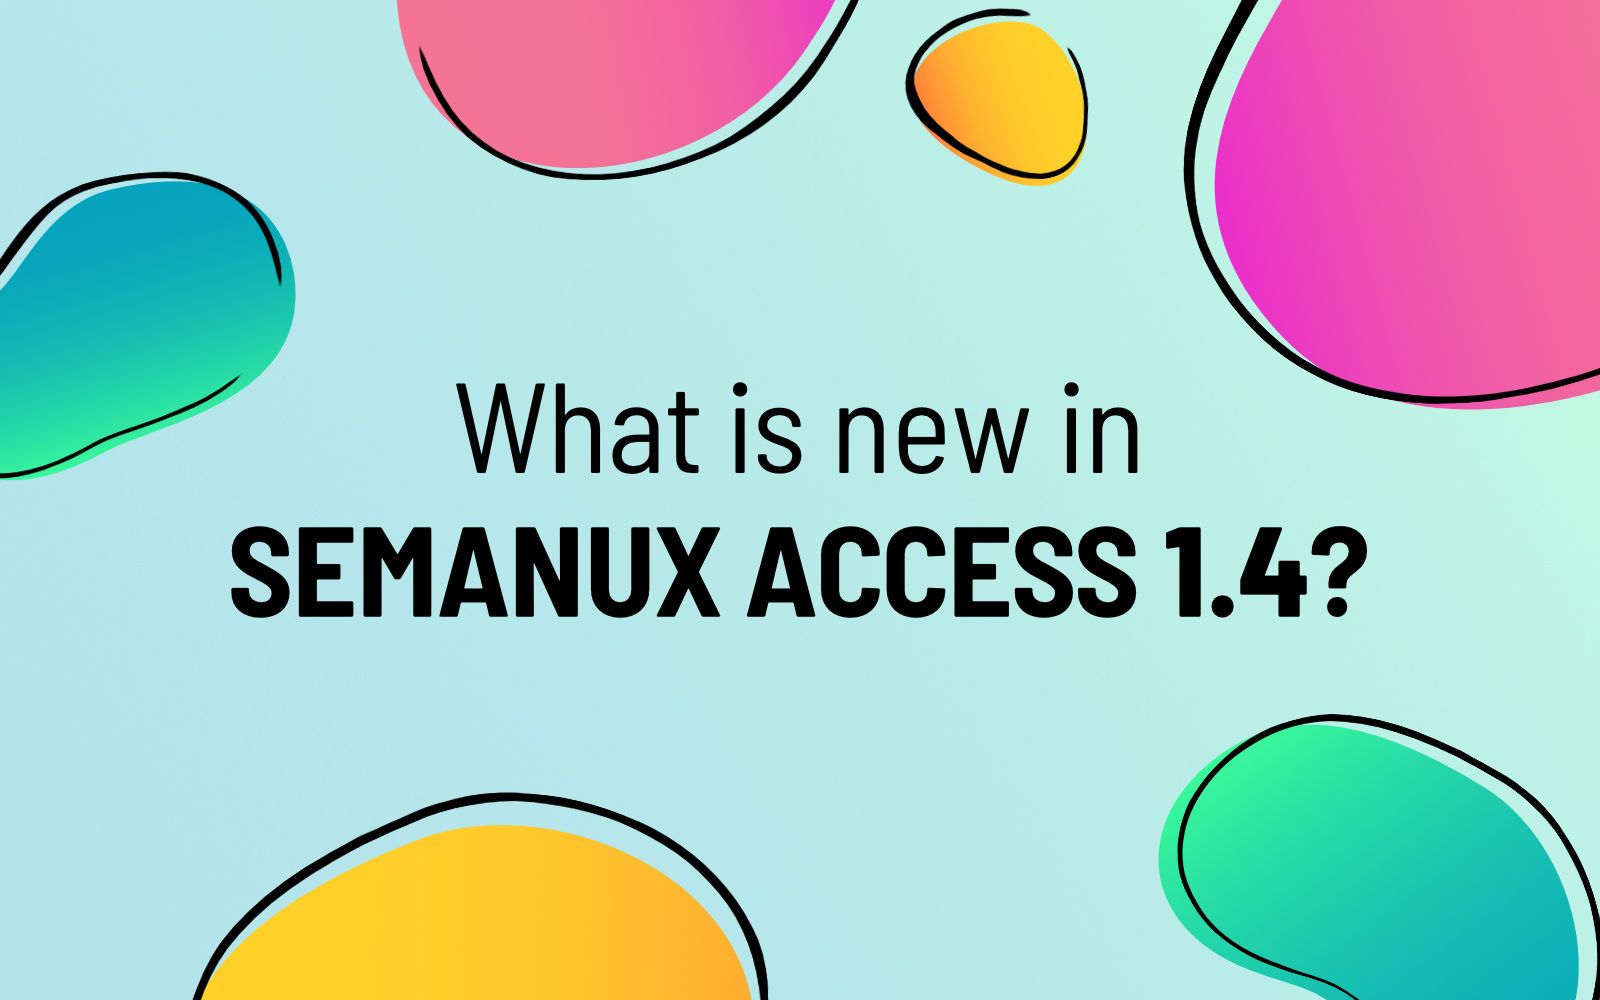 What is new in Semanux Access 1.4?